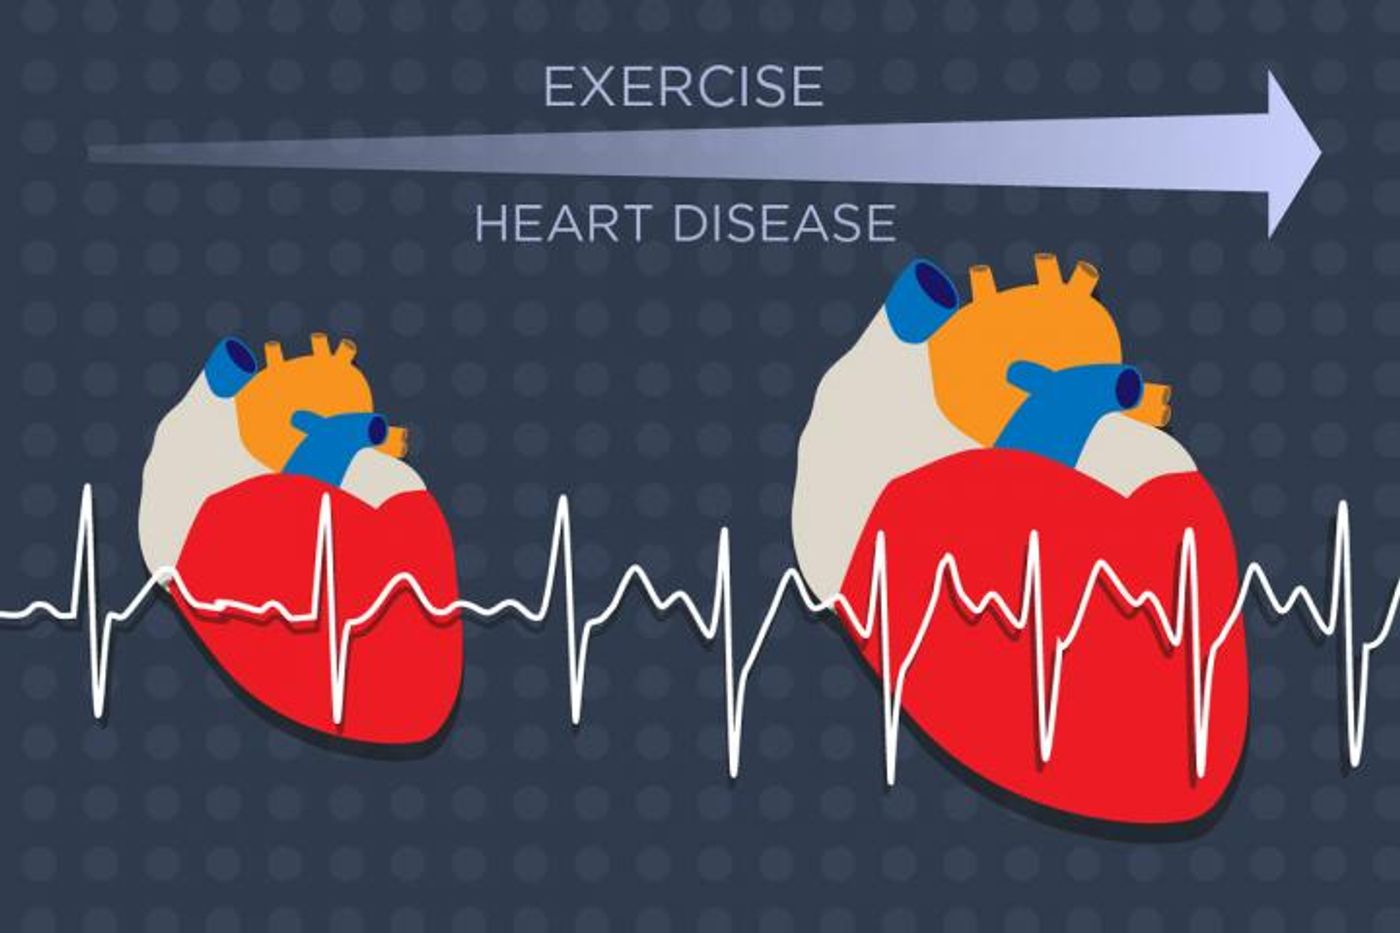 The heart enlarges in response to growing demands from exercise or heart disease. A new study identifies a key molecular player in this process. Credit: Julie McMahon